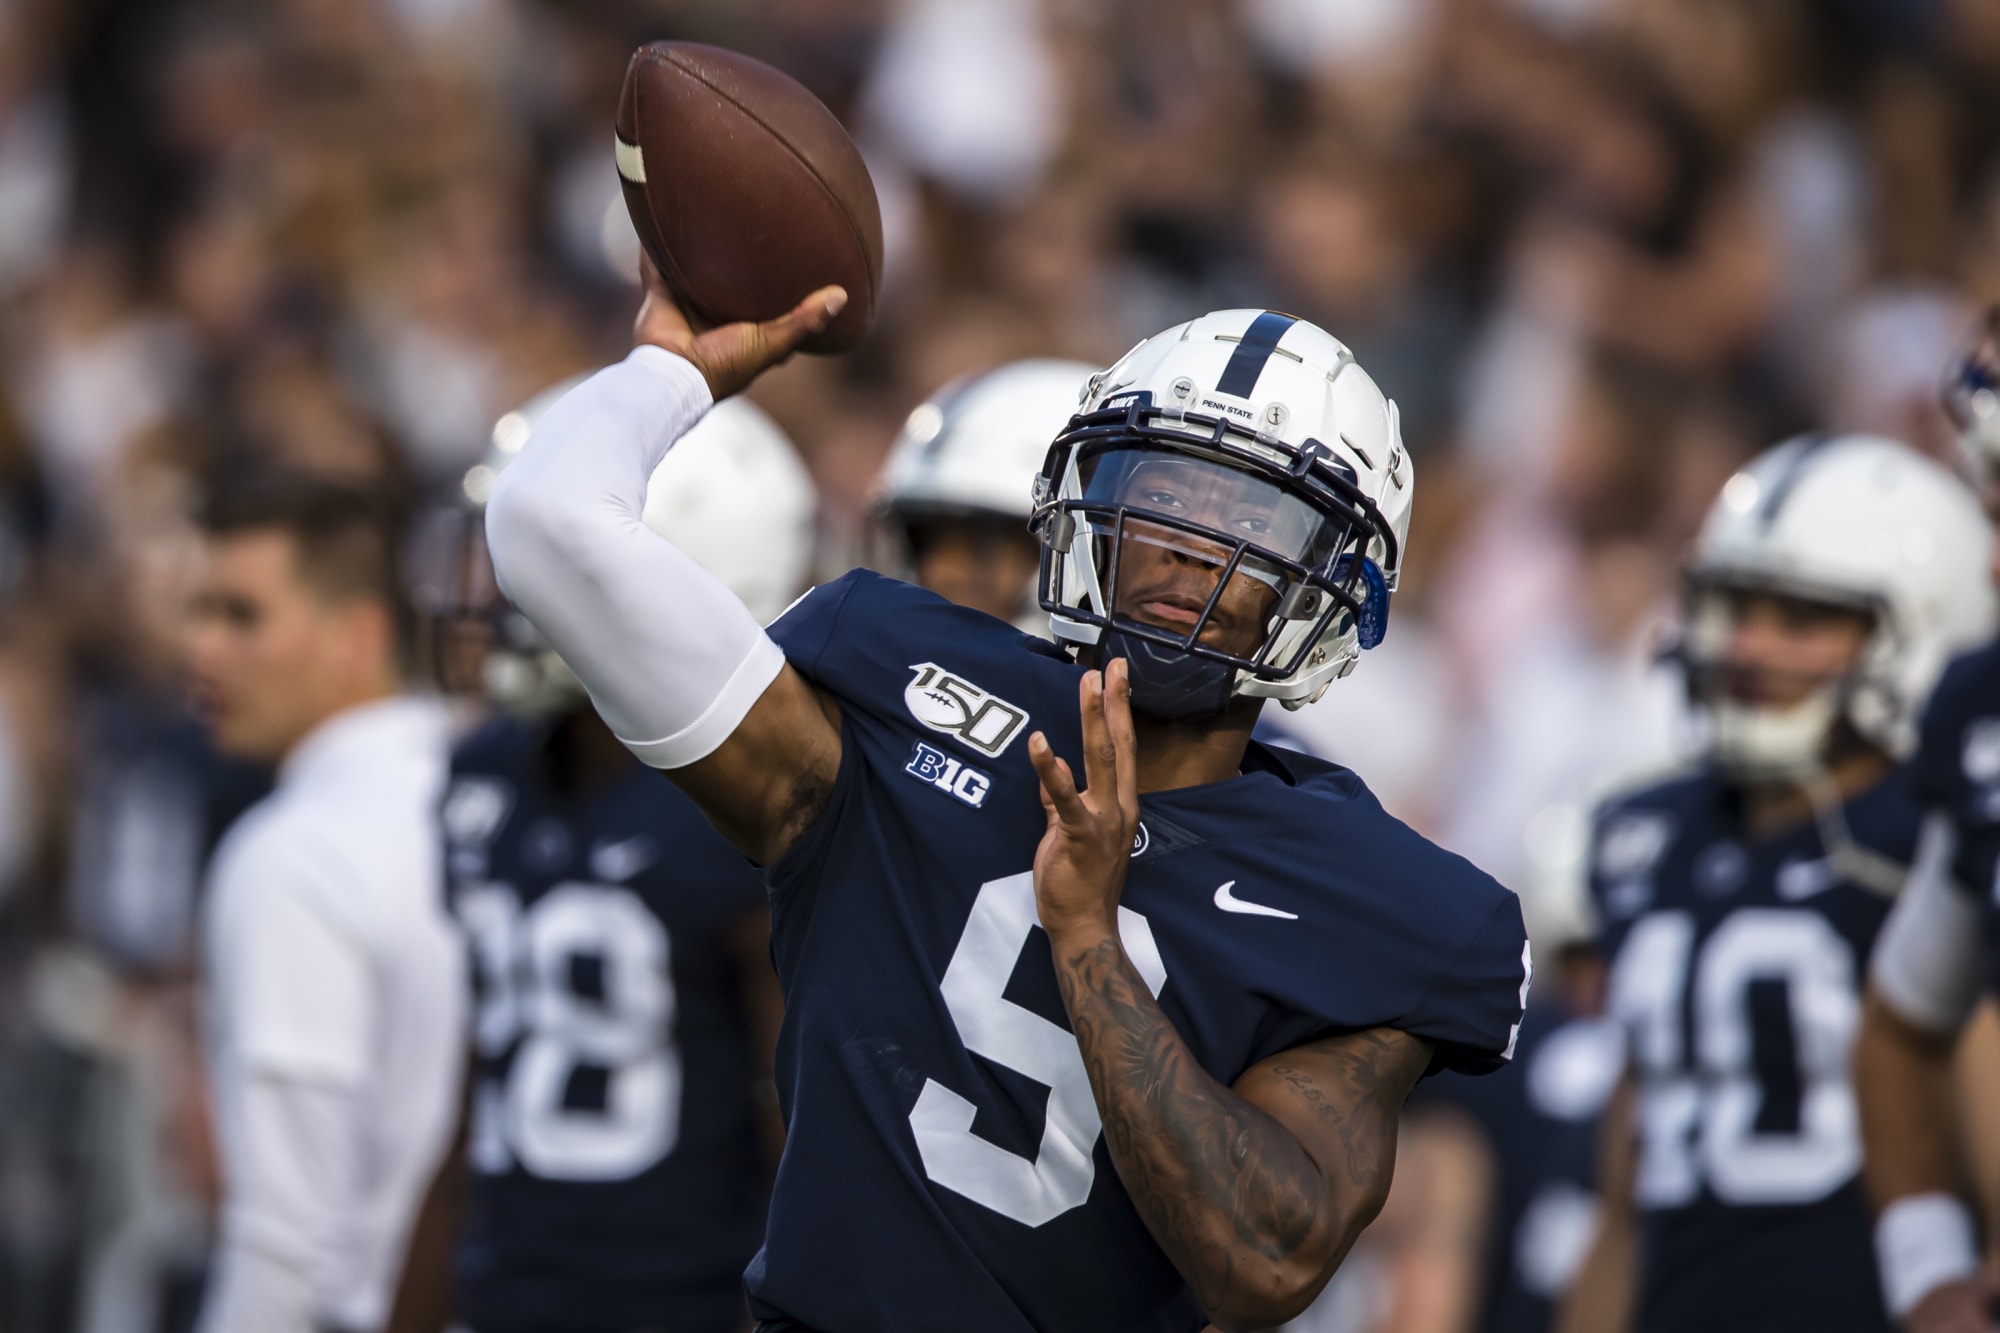 QB controversy looming? Penn State Football's scrimmage takeaways